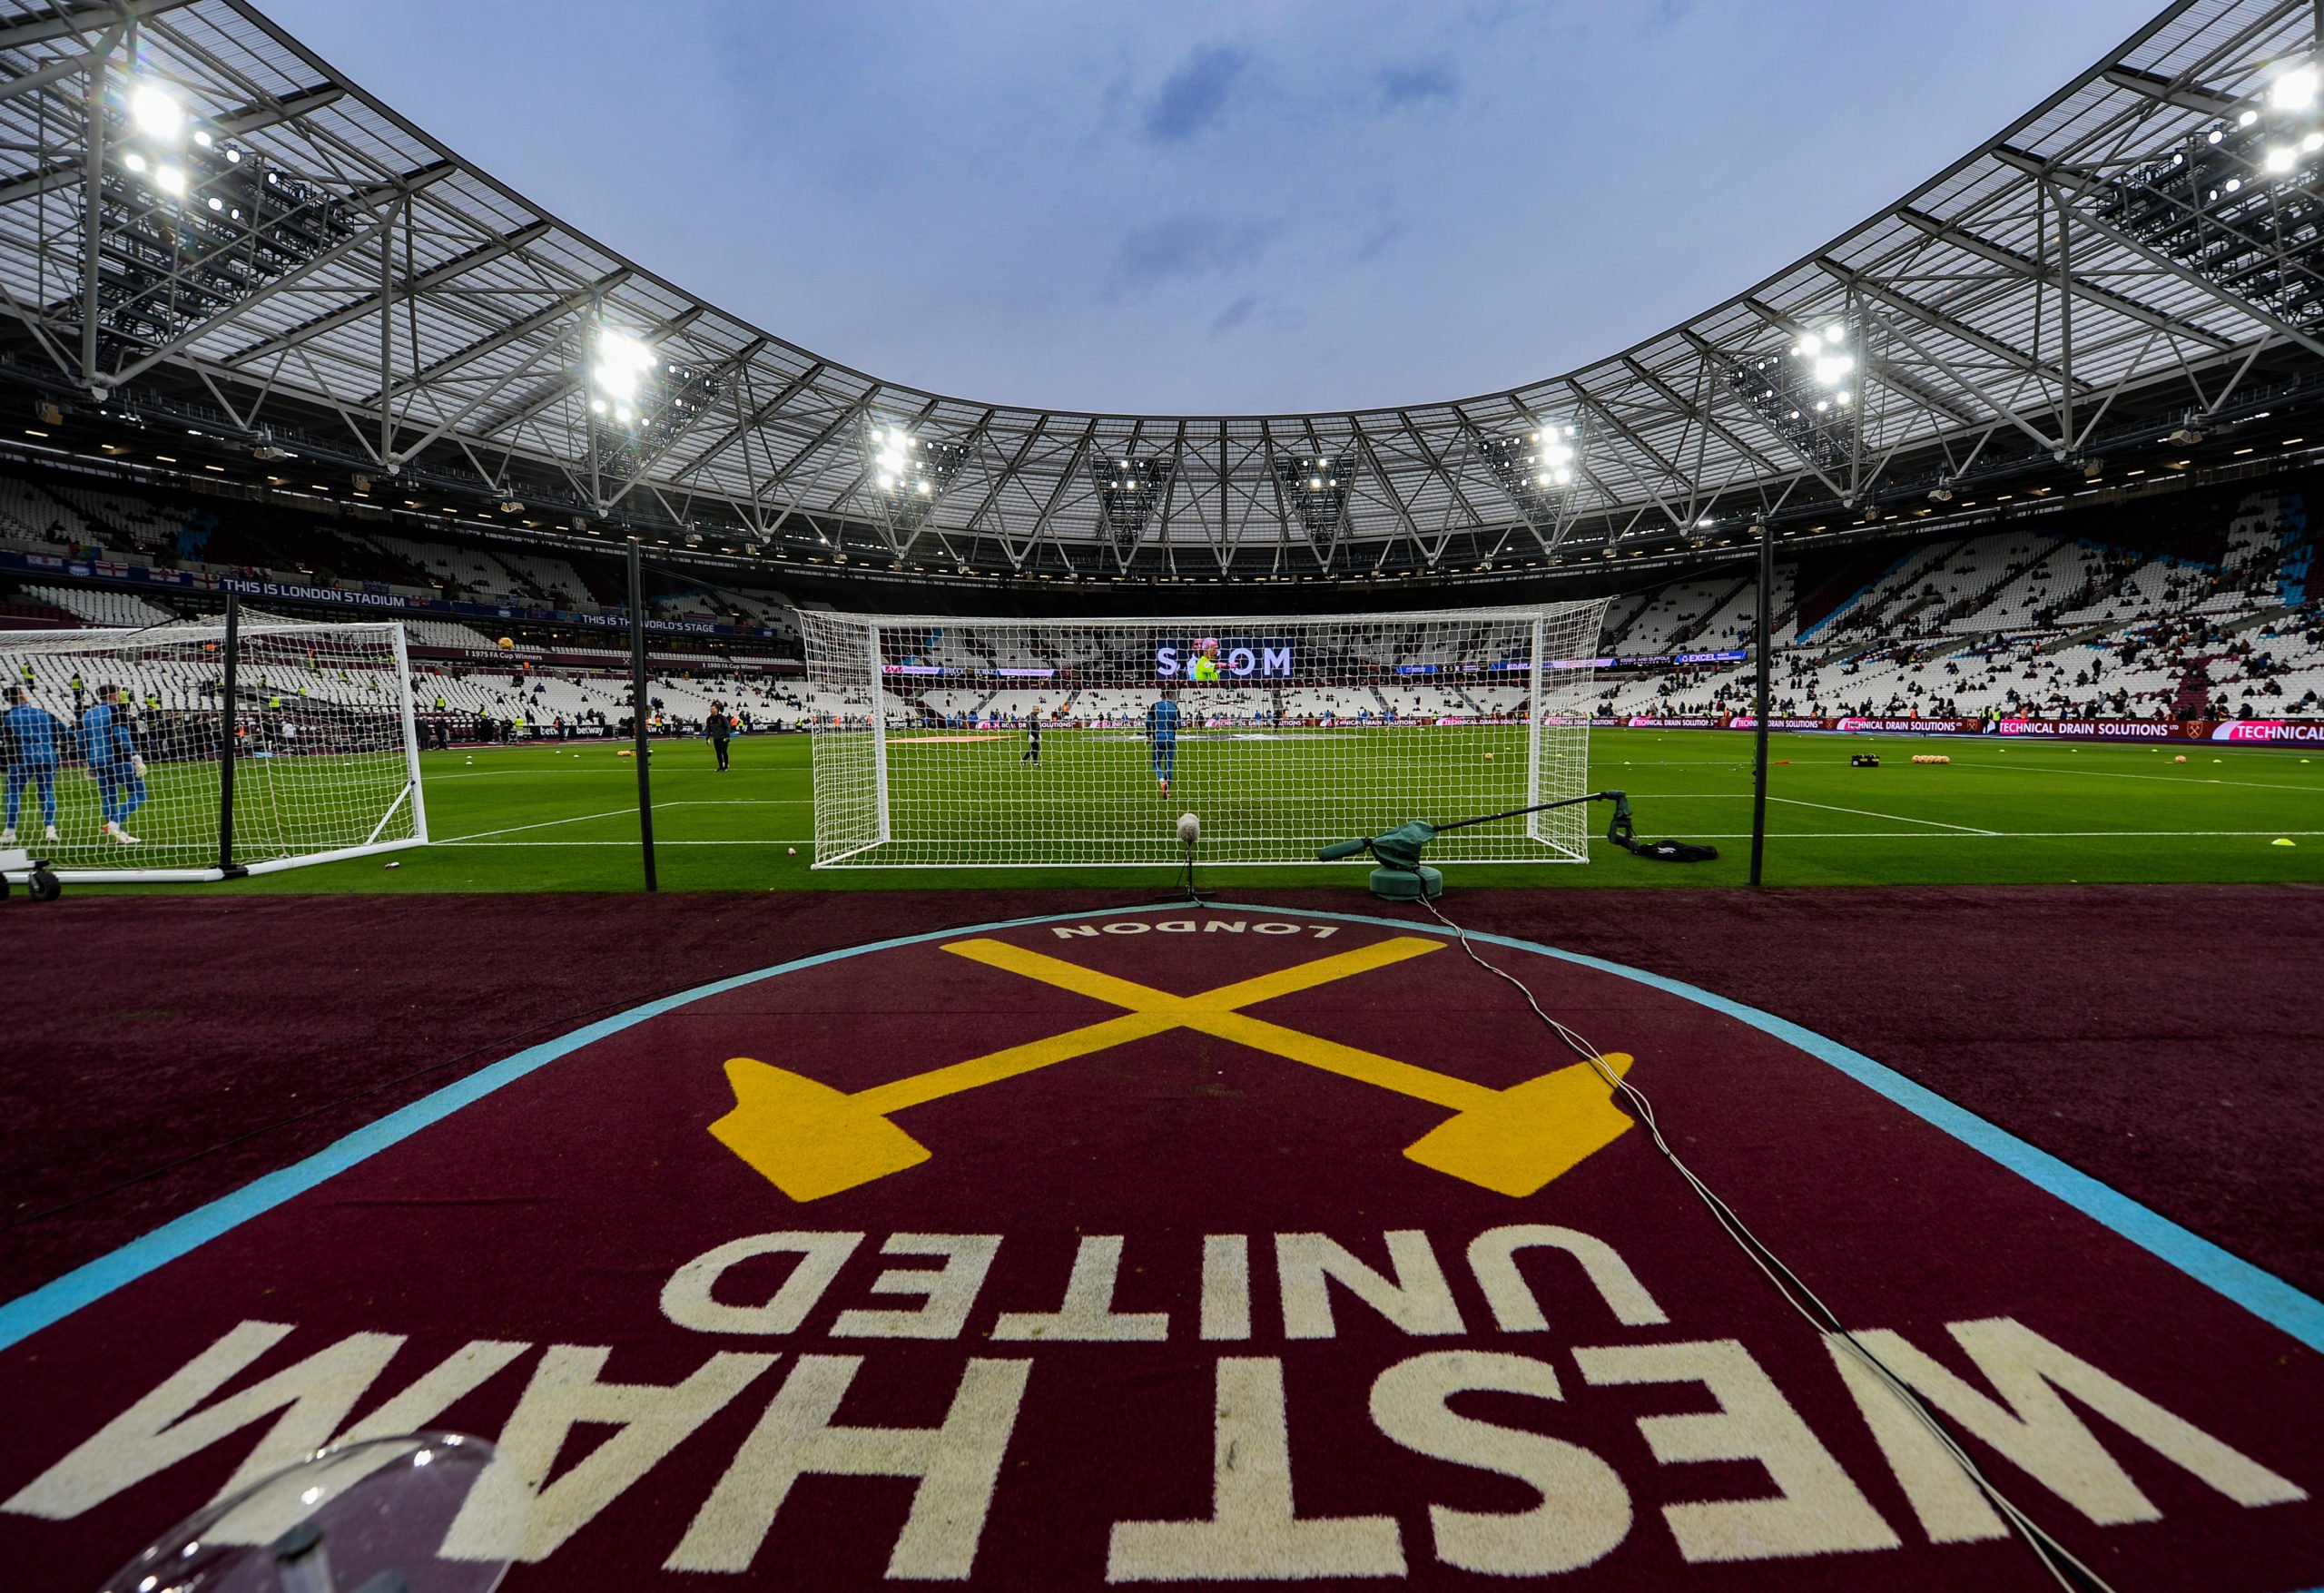 Russians give West Ham London Stadium hope for future after Real Sociedad example